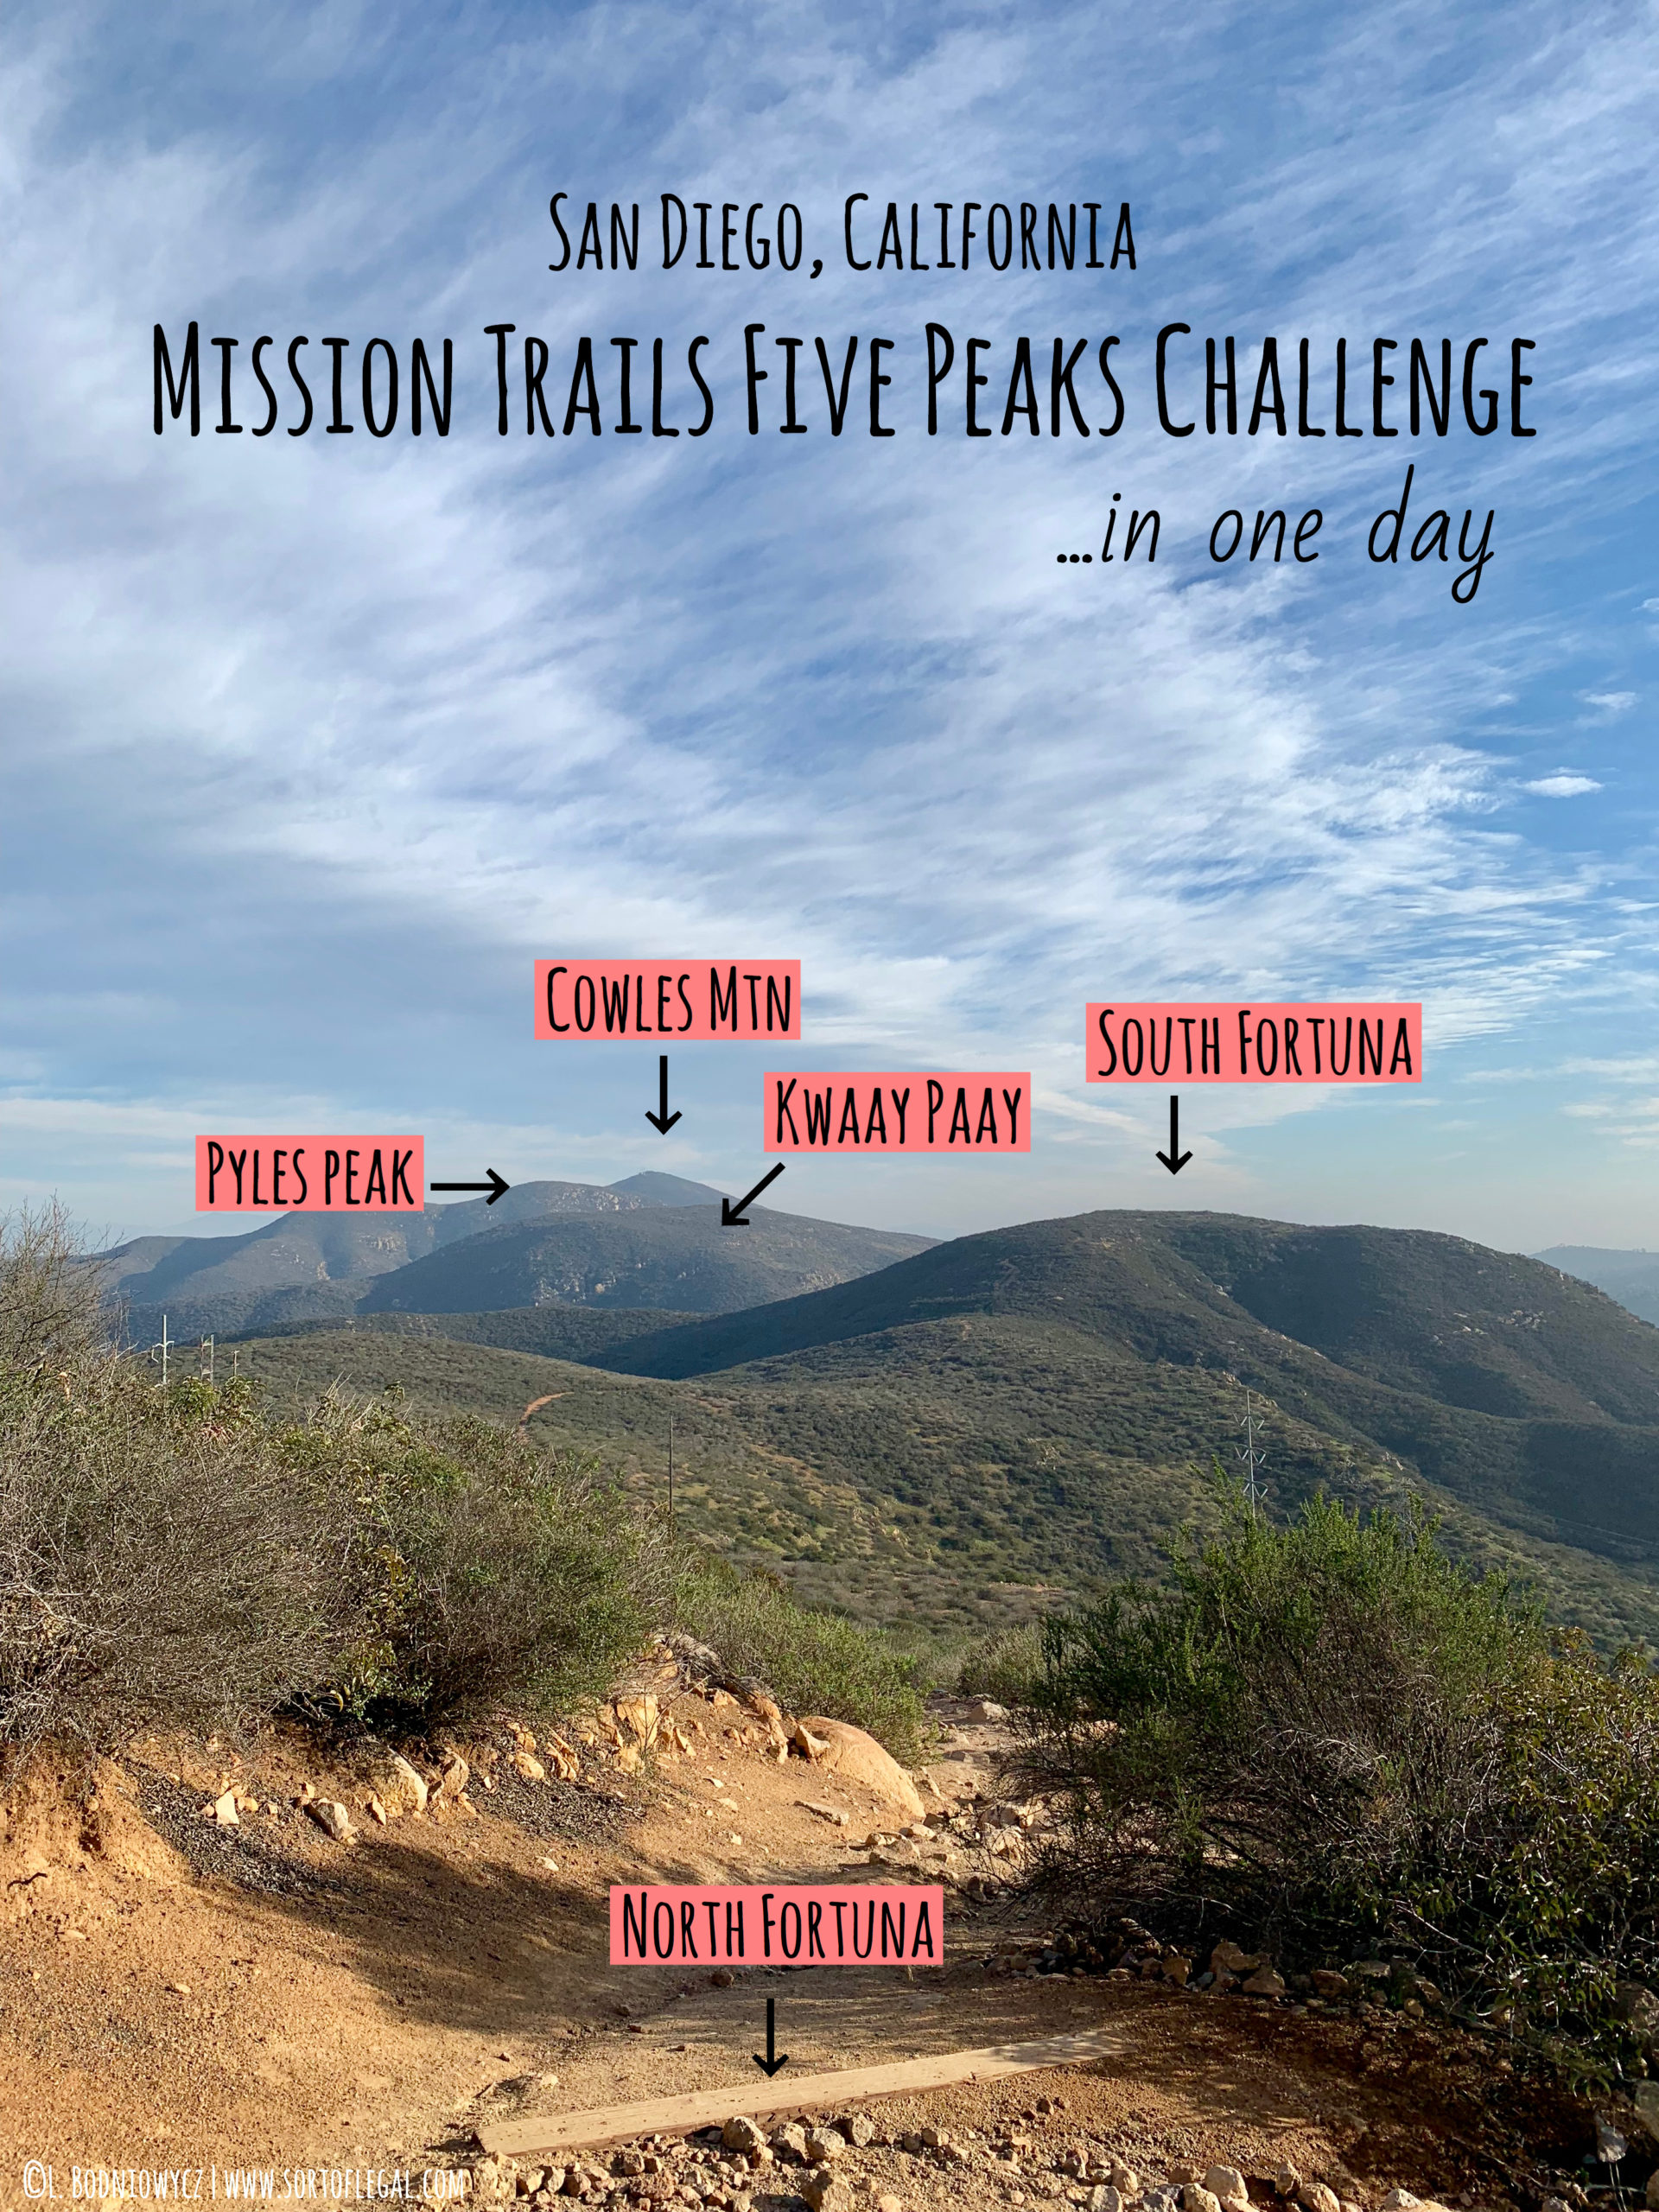 View from North Fortuna looking to other peaks in the Mission Trails Five Peak Challenge.